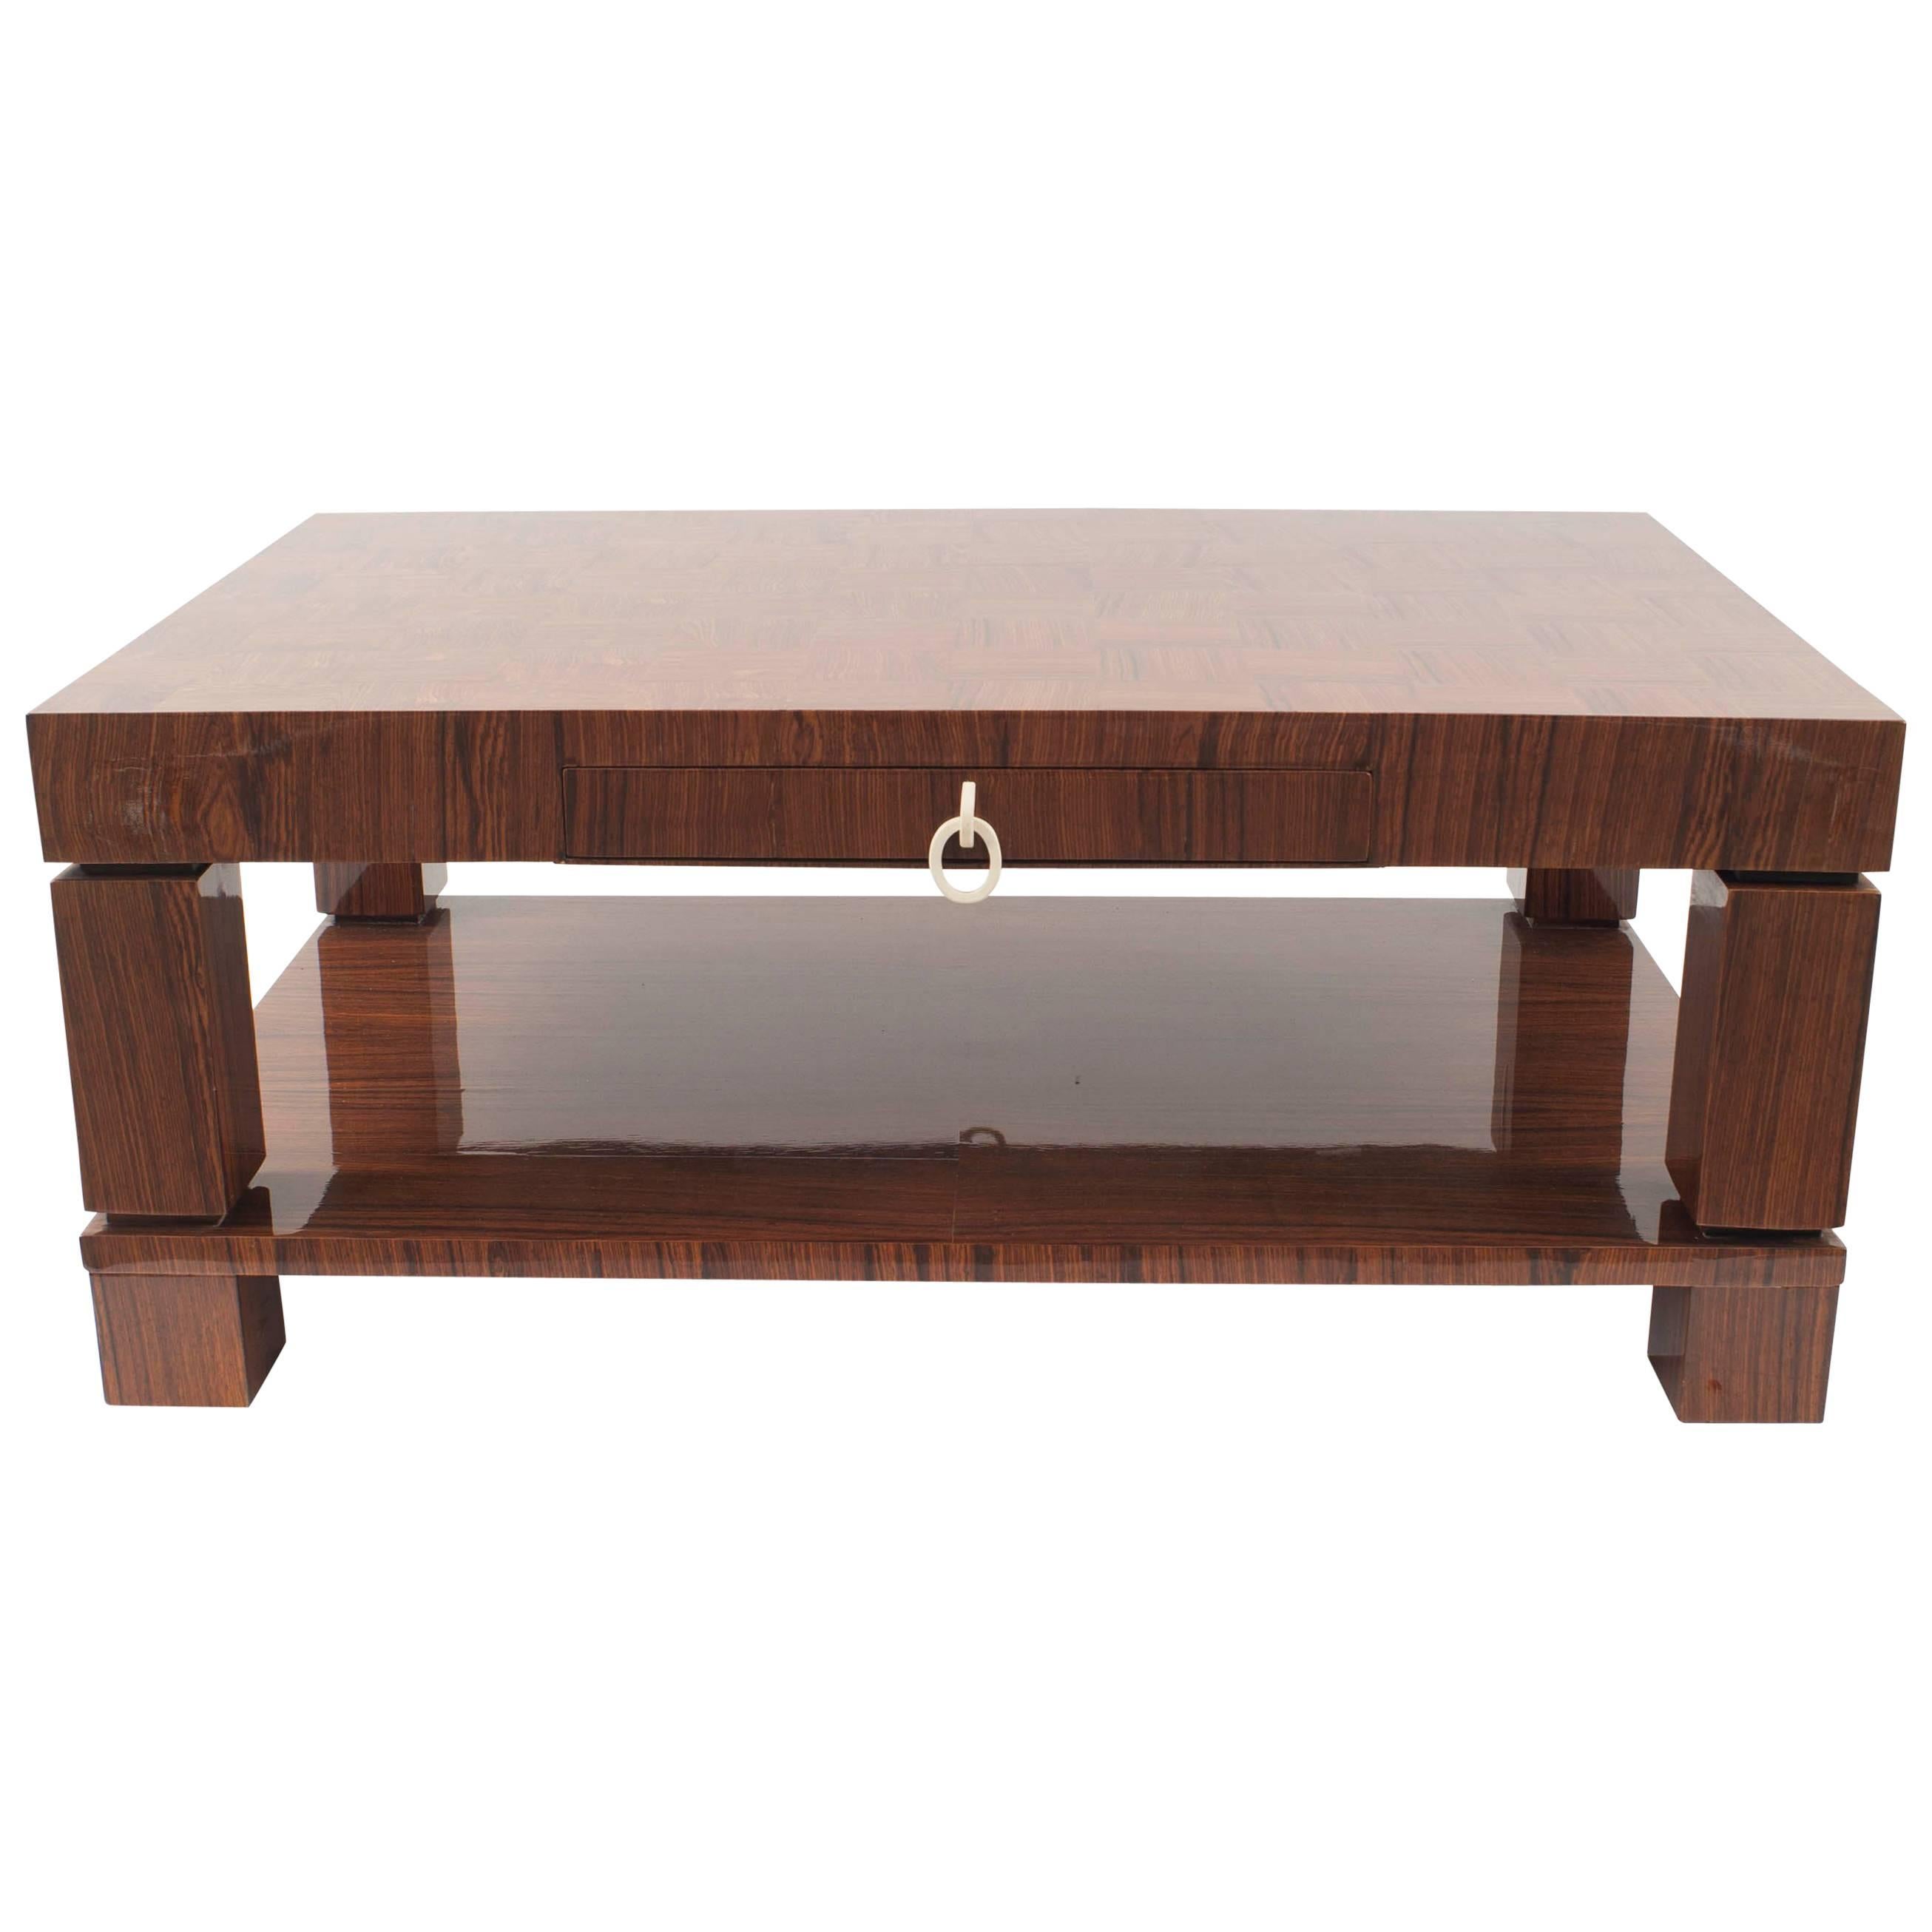 French Mid-Century (1950s) rectangular rosewood coffee table with square legs supporting a shelf and a checkerboard design top with two side drawers with a brass knob handles.
